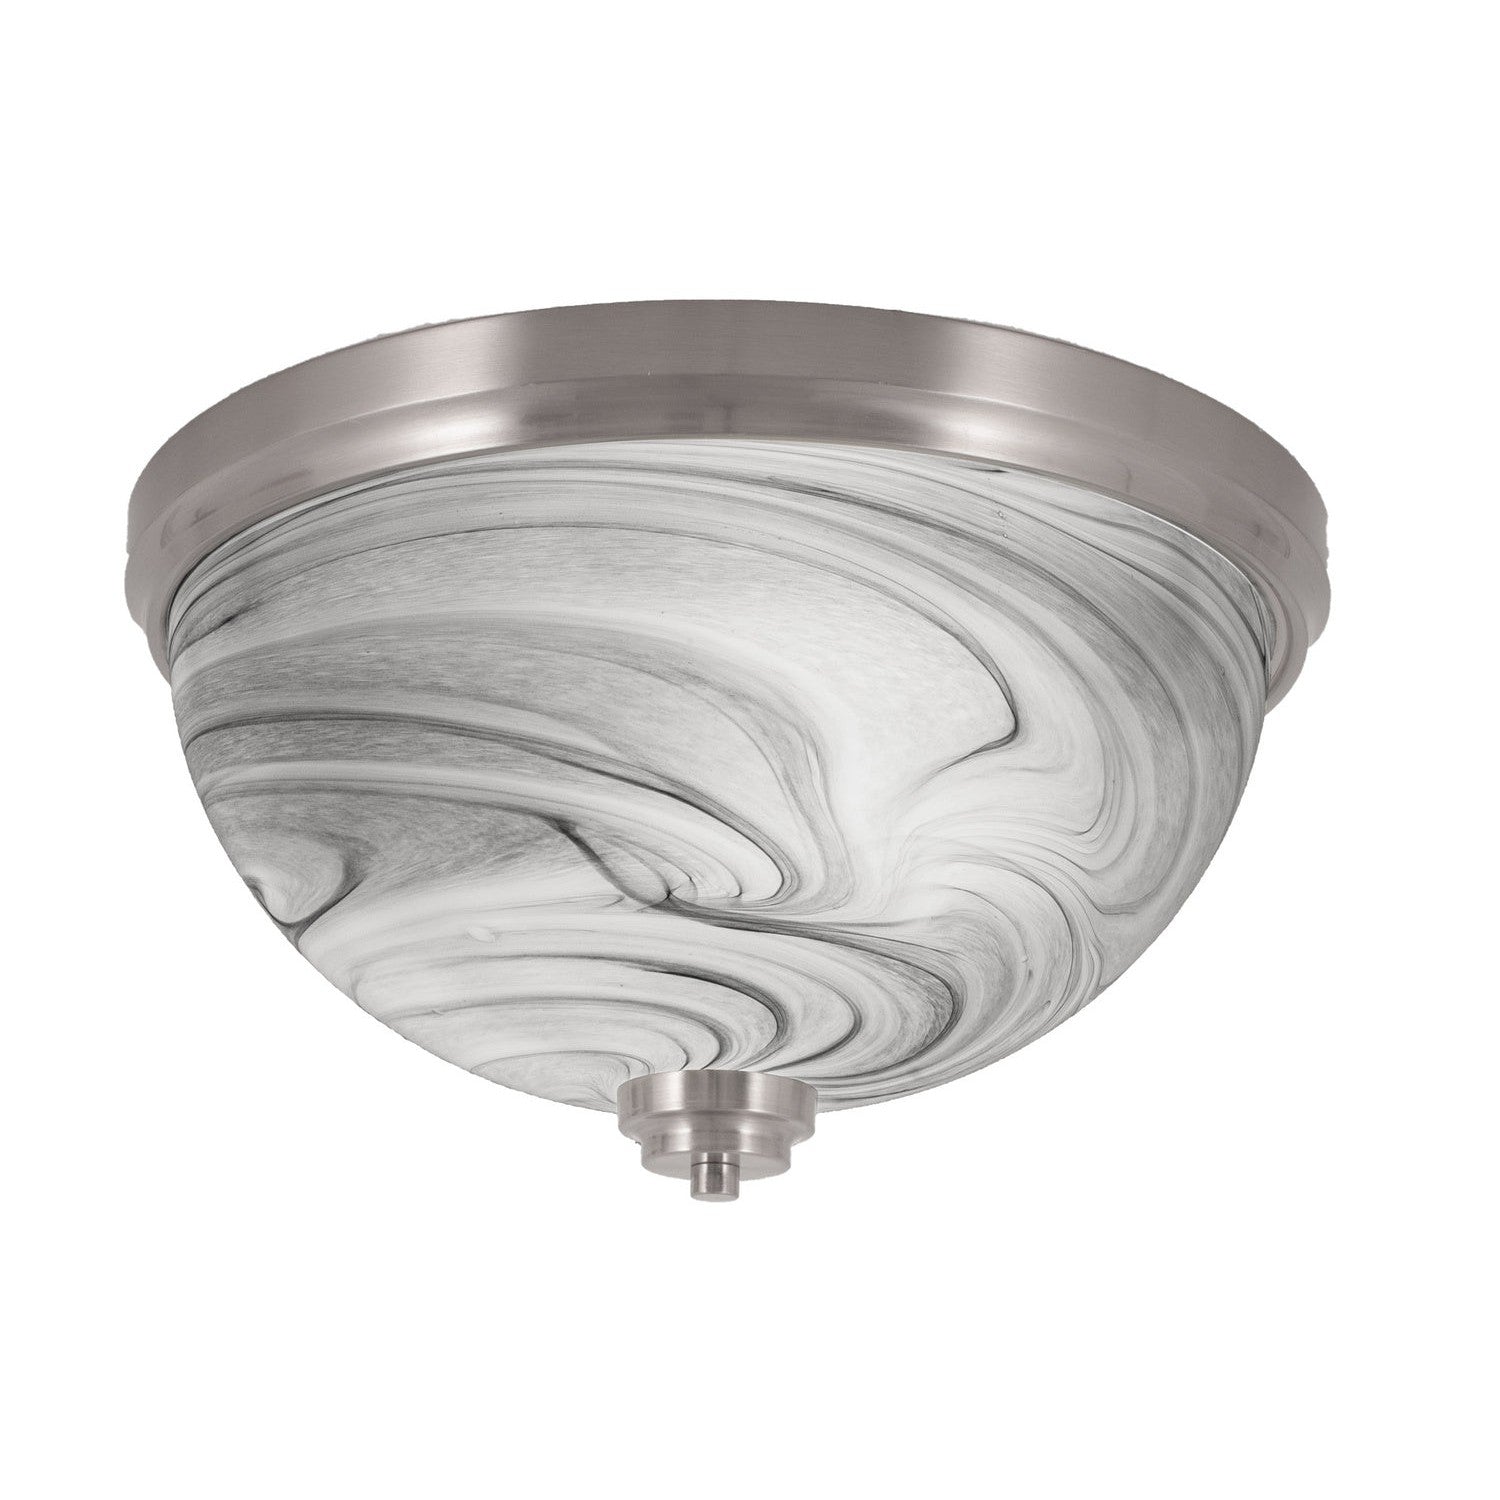 Toltec Any 826-bn-9 Ceiling Light - Brushed Nickel